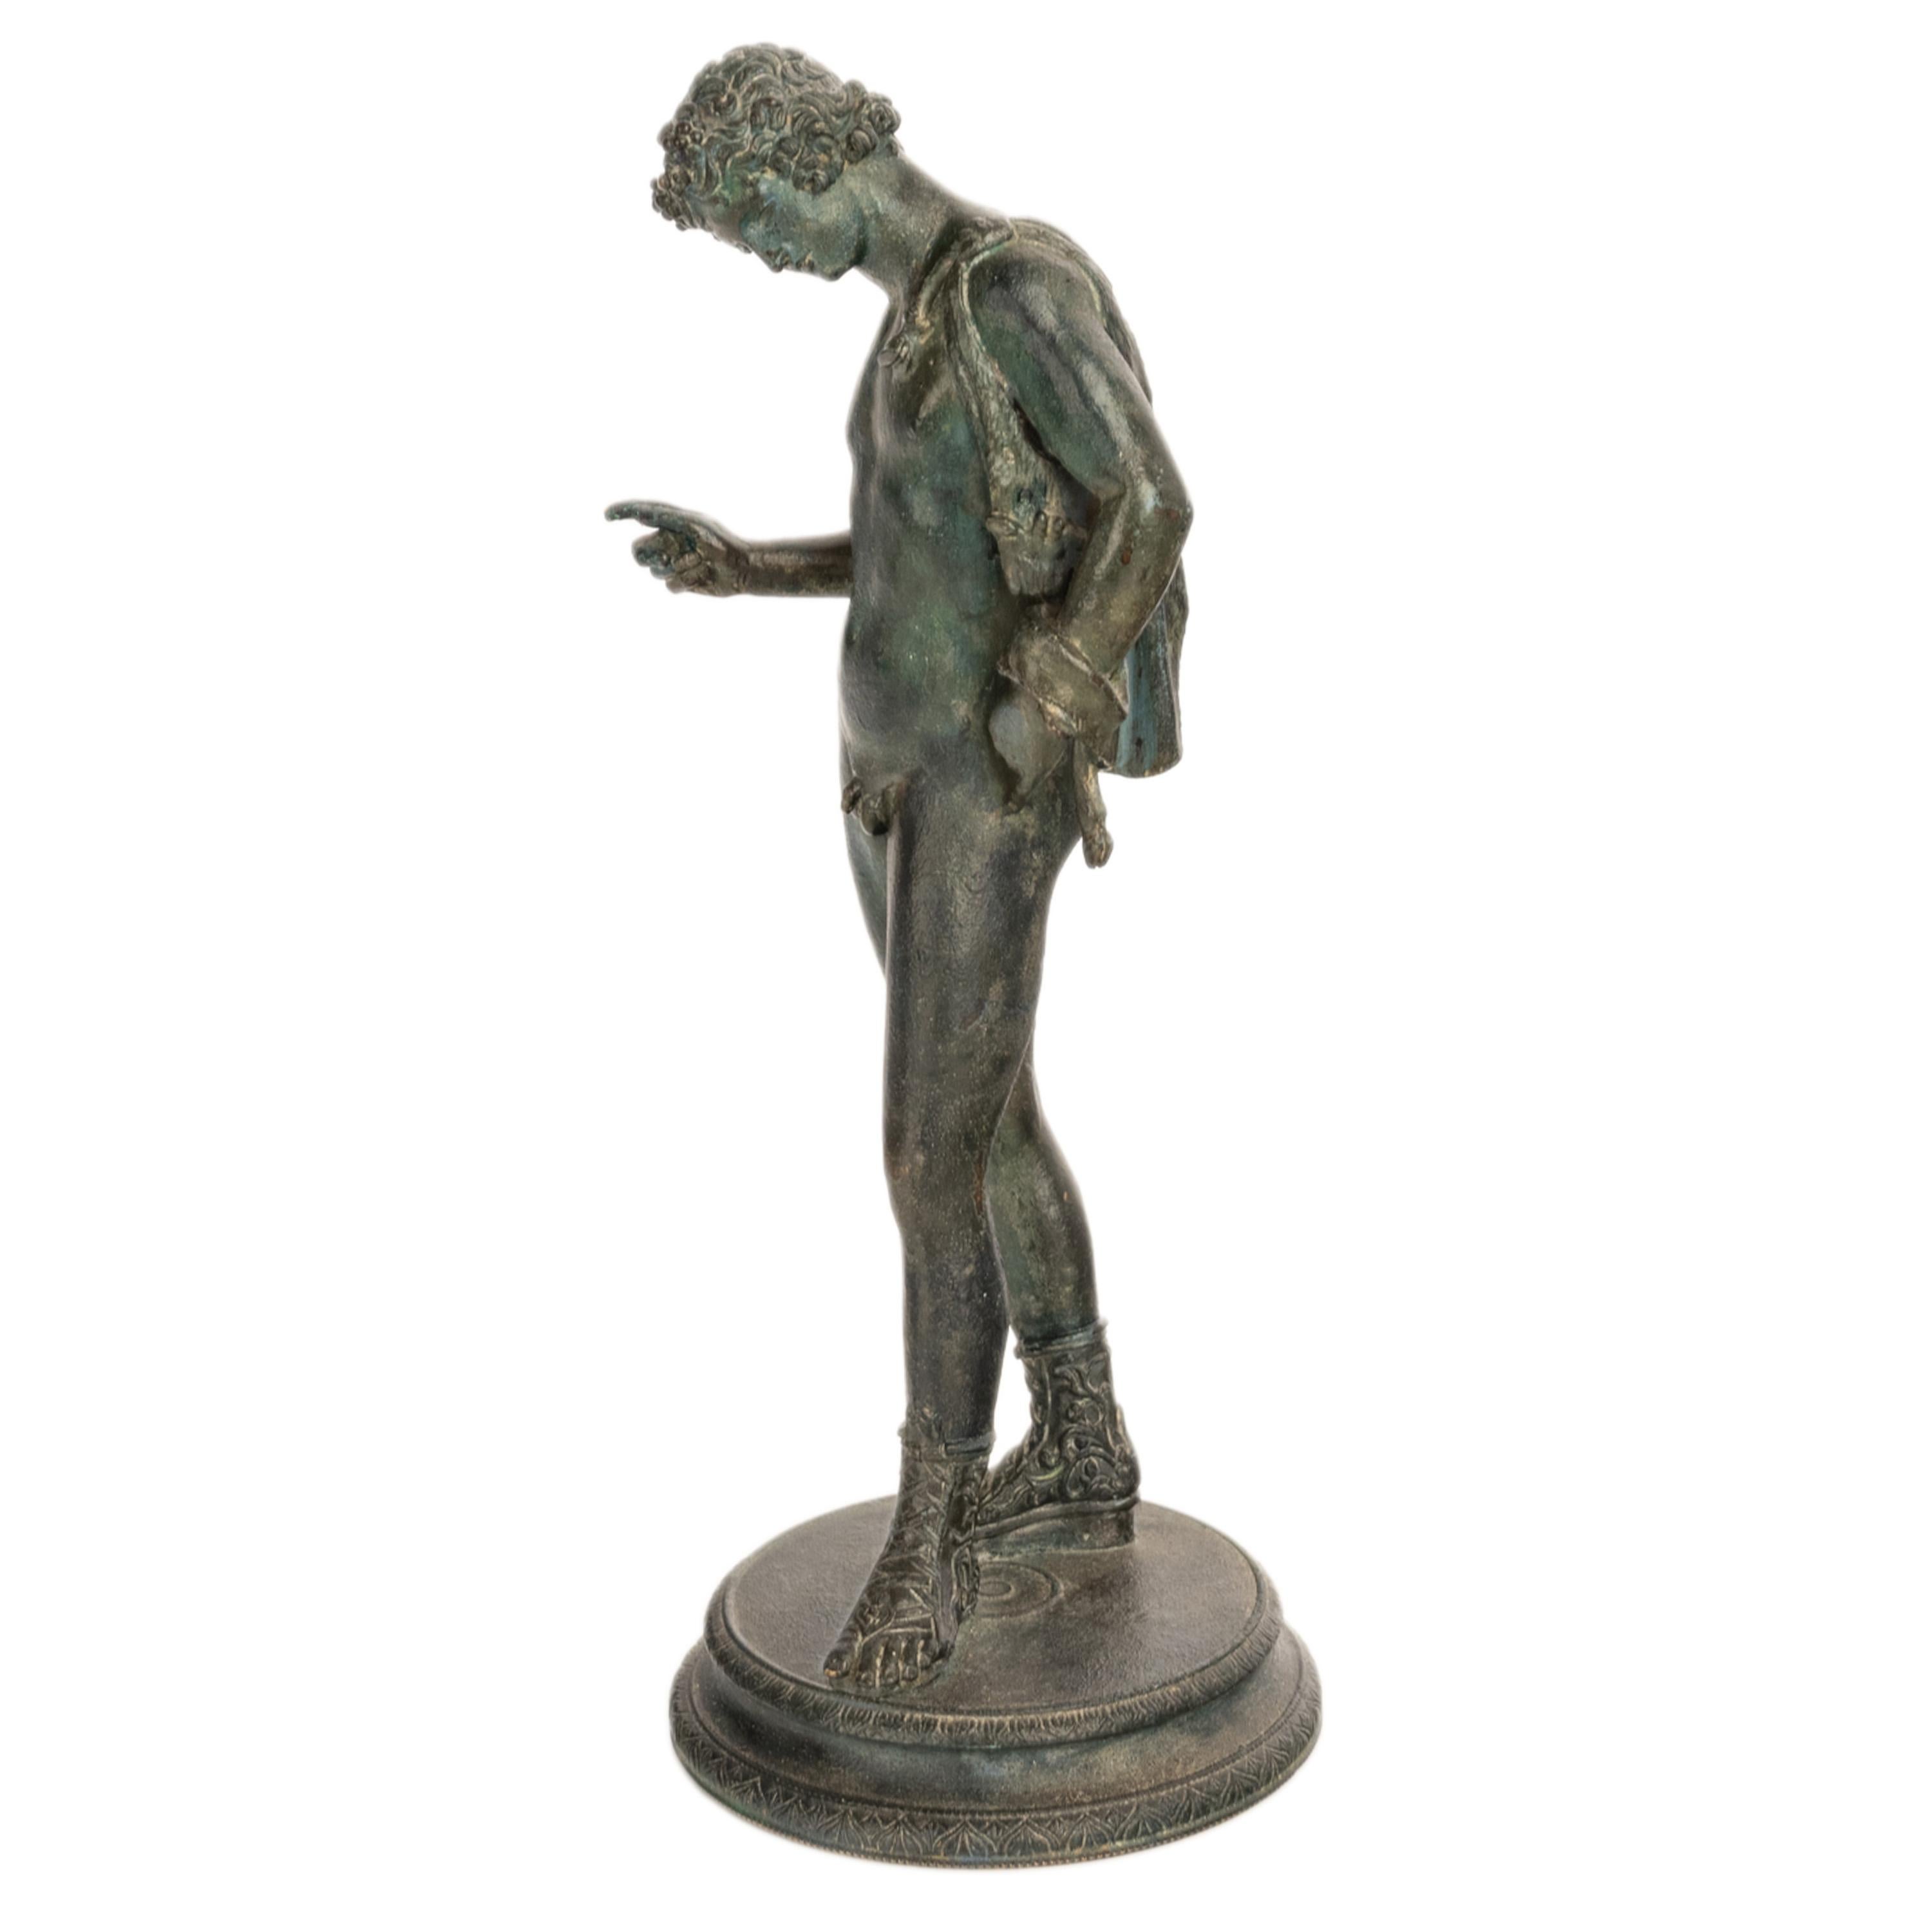 Antique bronze statue of Narcissus by Michele Amodio (1817-1913) Italy, 1862.

Amodio was an Italian artist and foundry owner active in the mid to late 19th century. This Neapolitan bronze figure of Narcissus was cast by the lost wax method after a